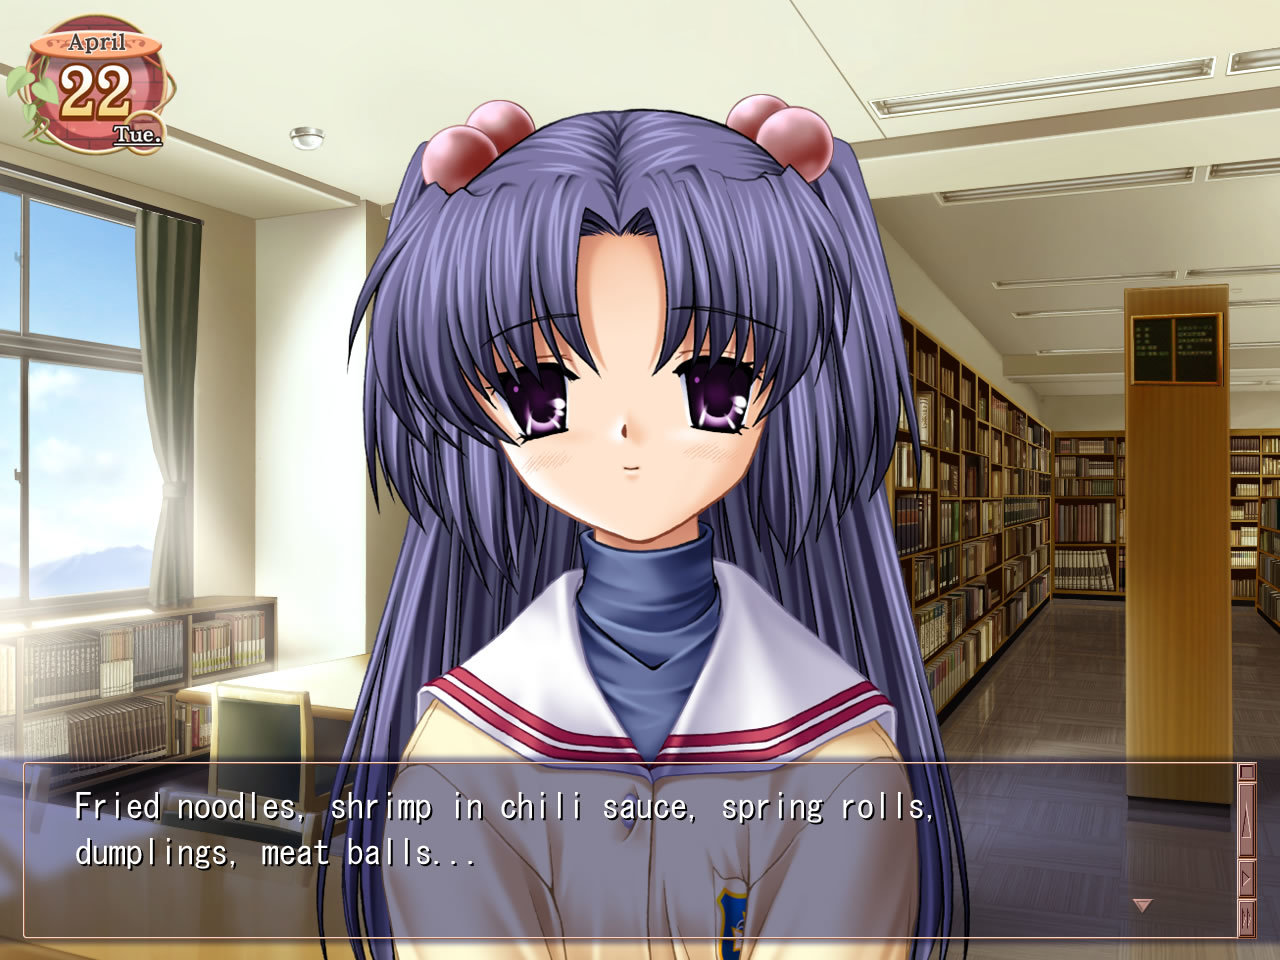 CLANNAD - Fuko Ibuki Route & Character Discussion - Key Discussion